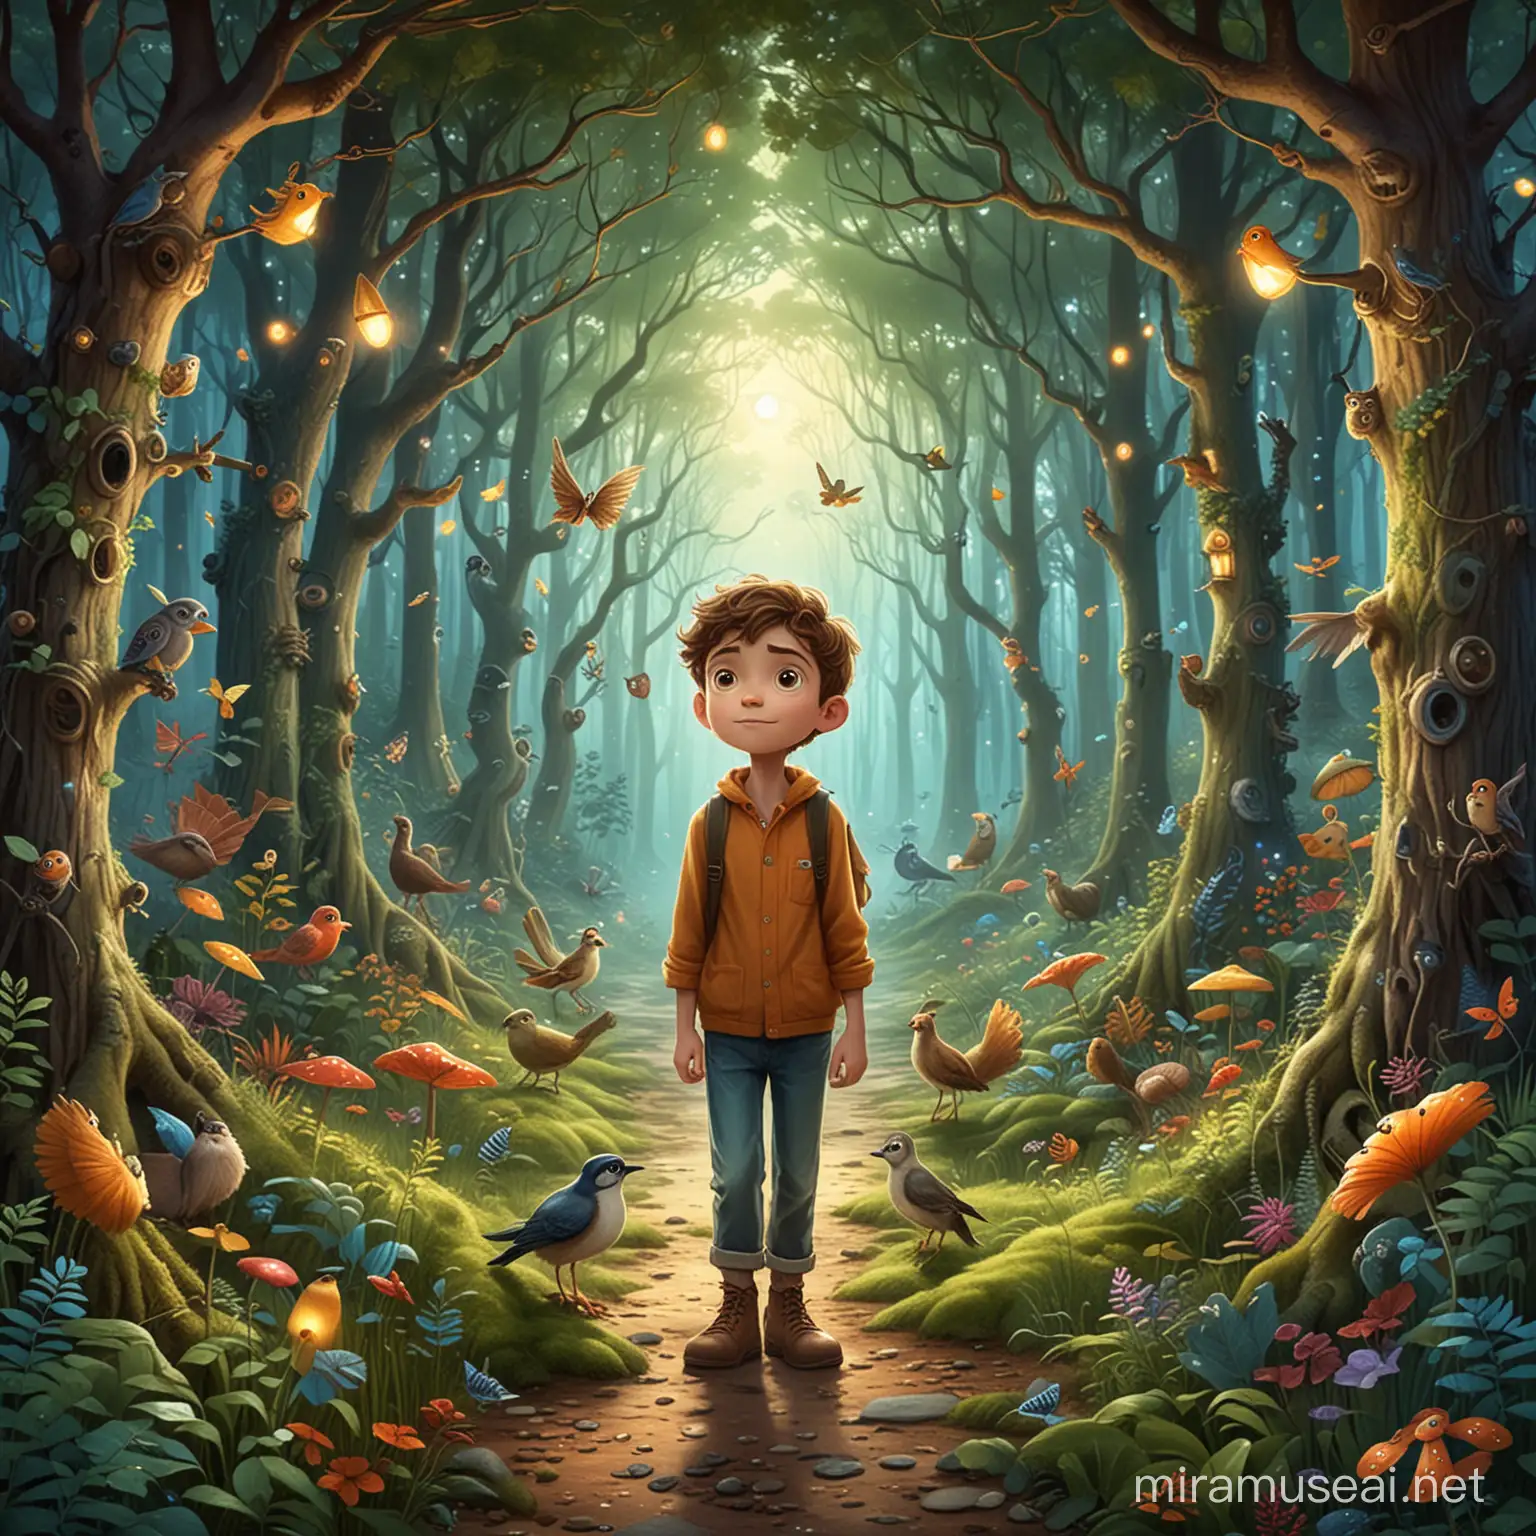 Whimsical Forest Adventure with Leo and Enchanted Creatures